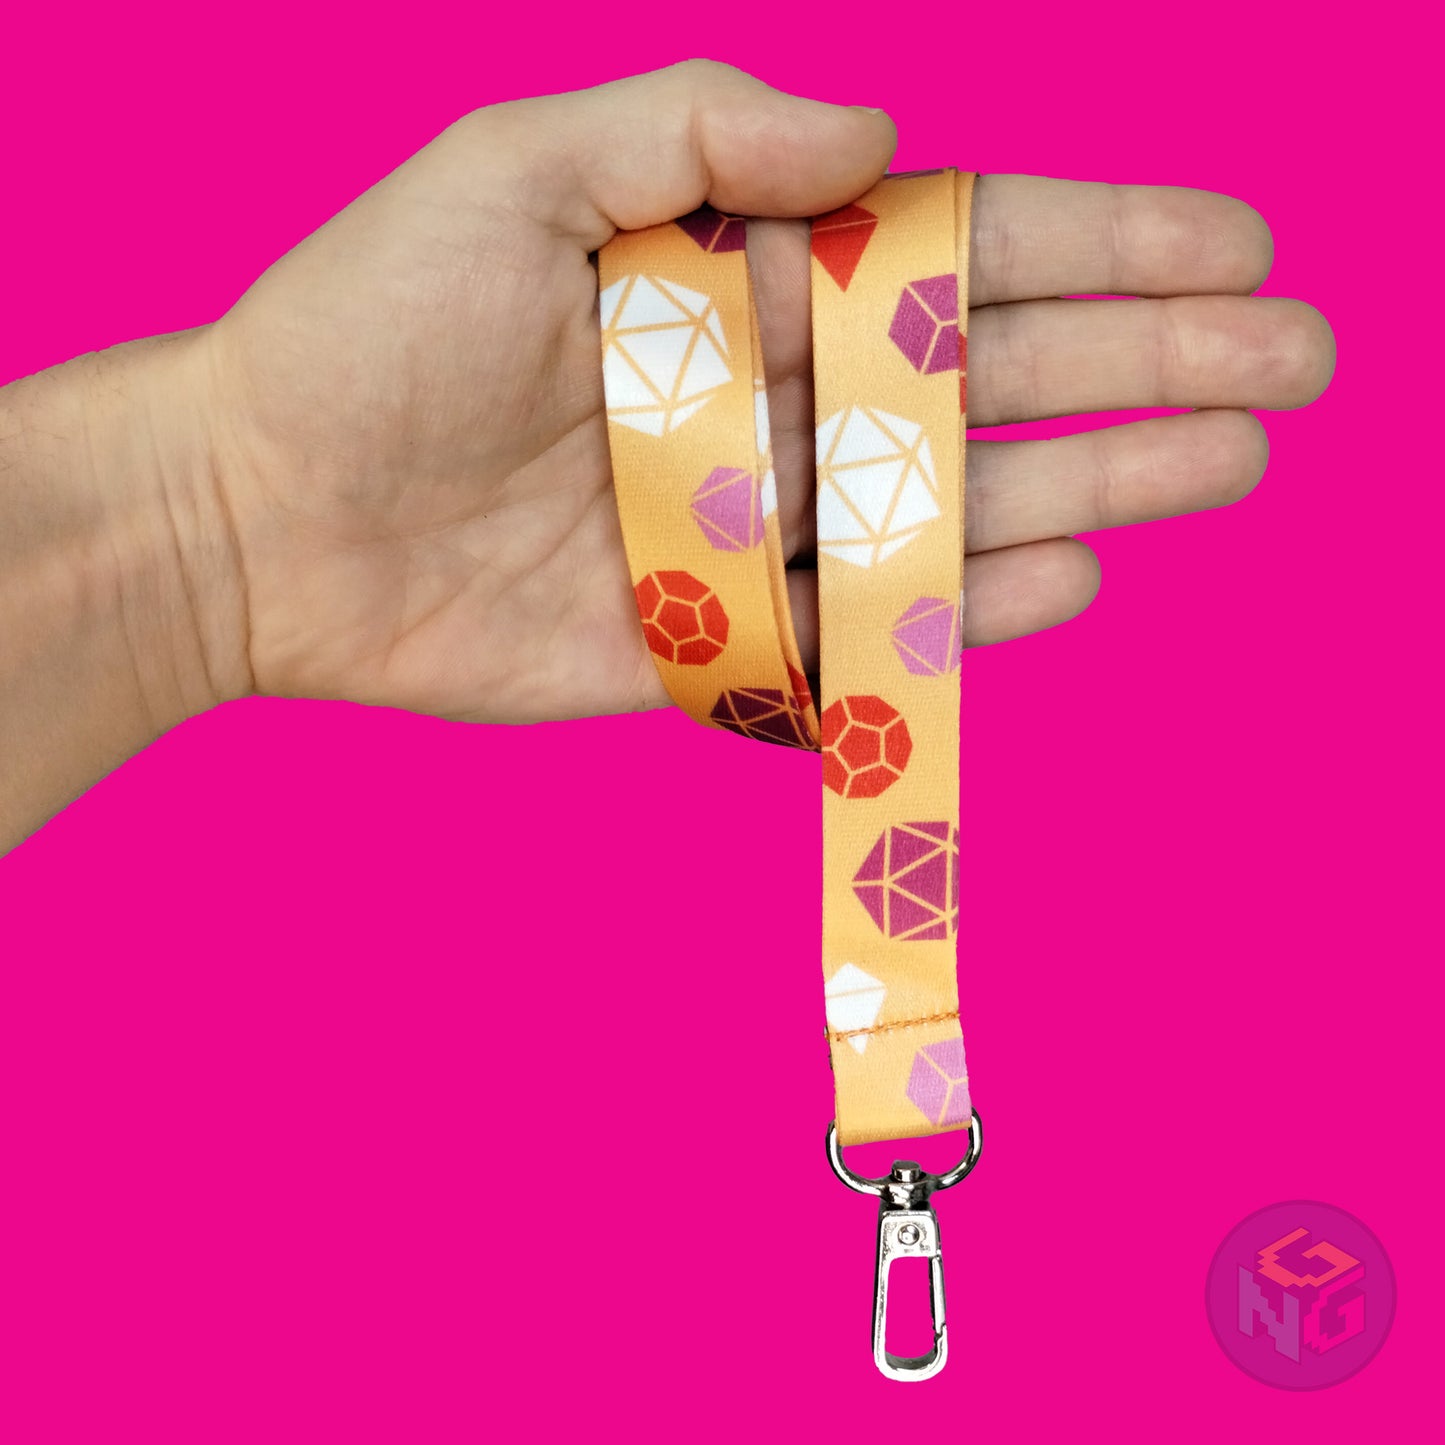 orange lesbian dice lanyard wrapped around a hand with the lobster clasp dangling against a hot pink background